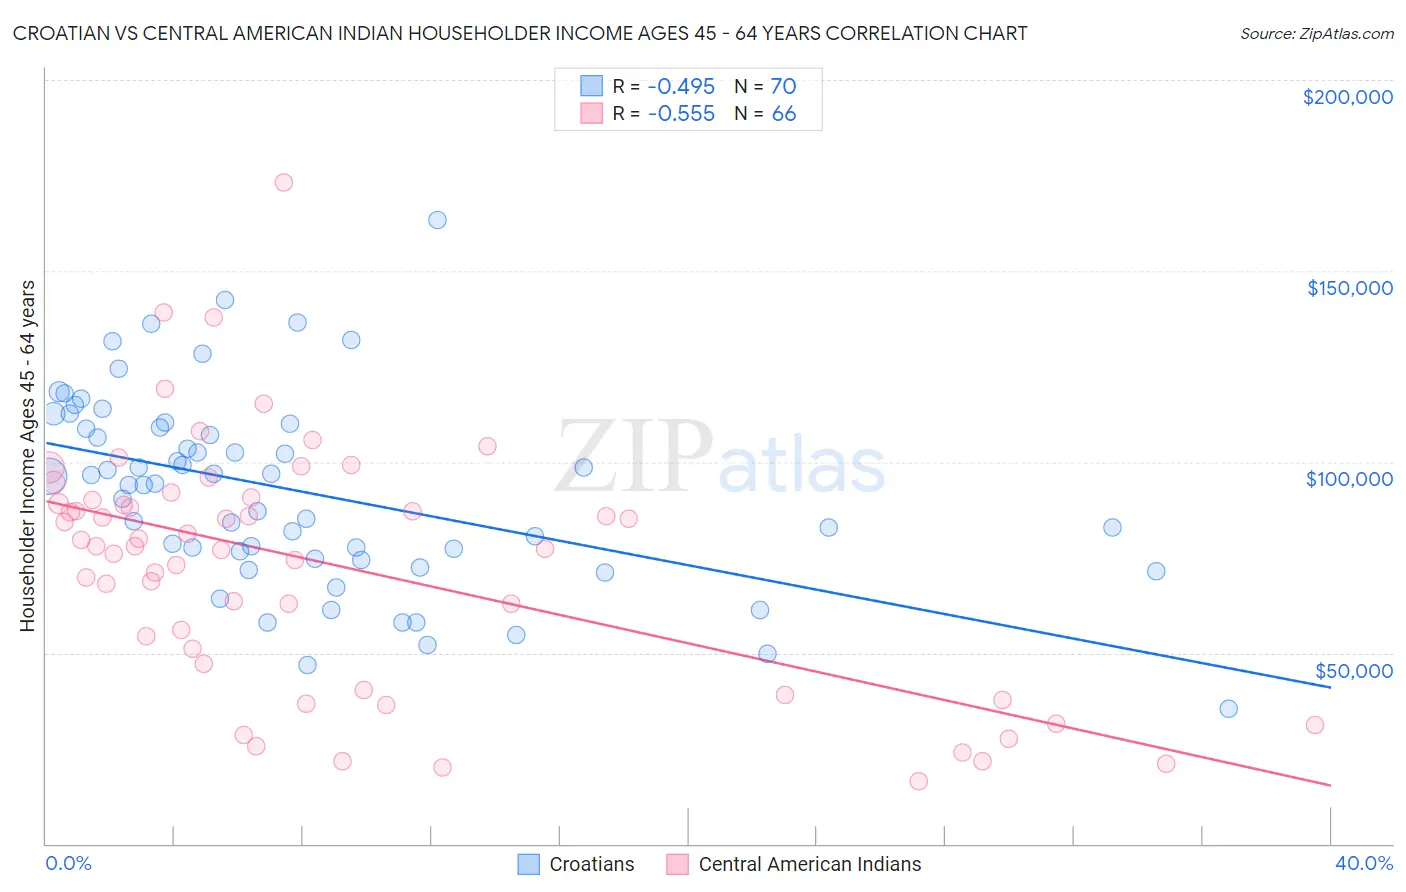 Croatian vs Central American Indian Householder Income Ages 45 - 64 years